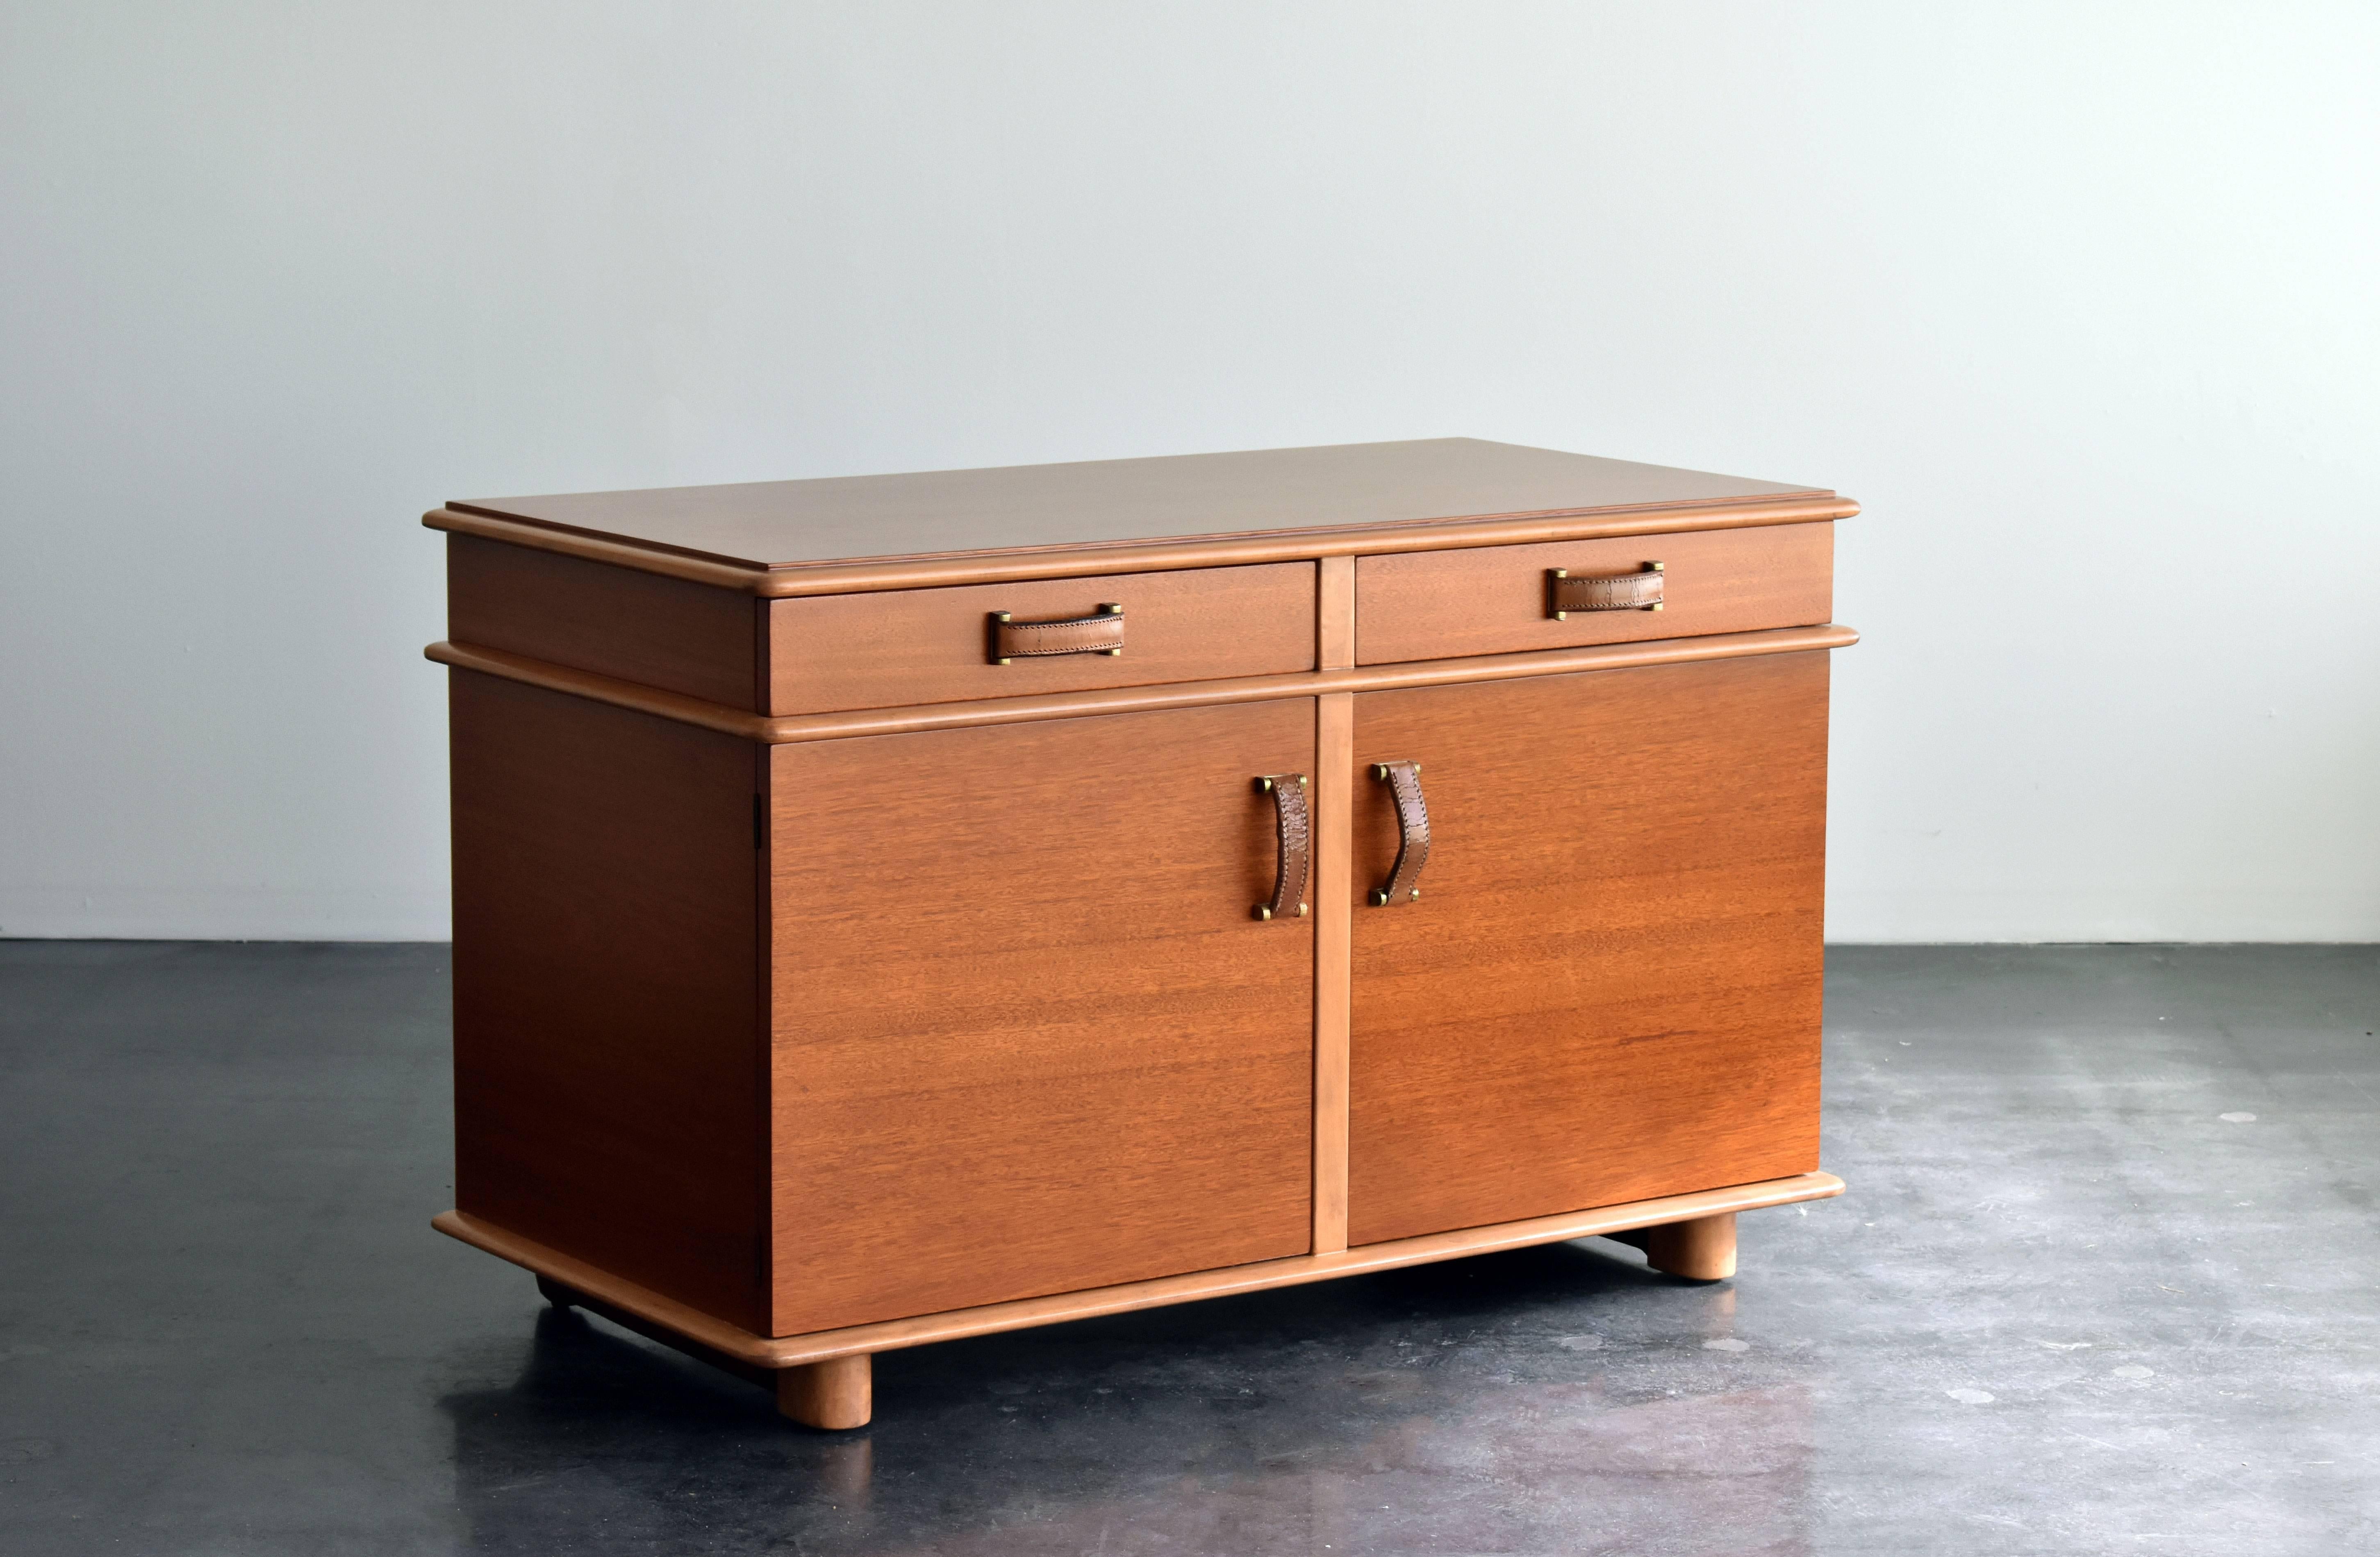 A beautiful and practical cabinet or buffet executed in mahogany, birch, leather, maple, brass. Features practical storage and a bar section.

Bears the iconic design of Austrian modernist designer or architect Paul Frankl. The present example is